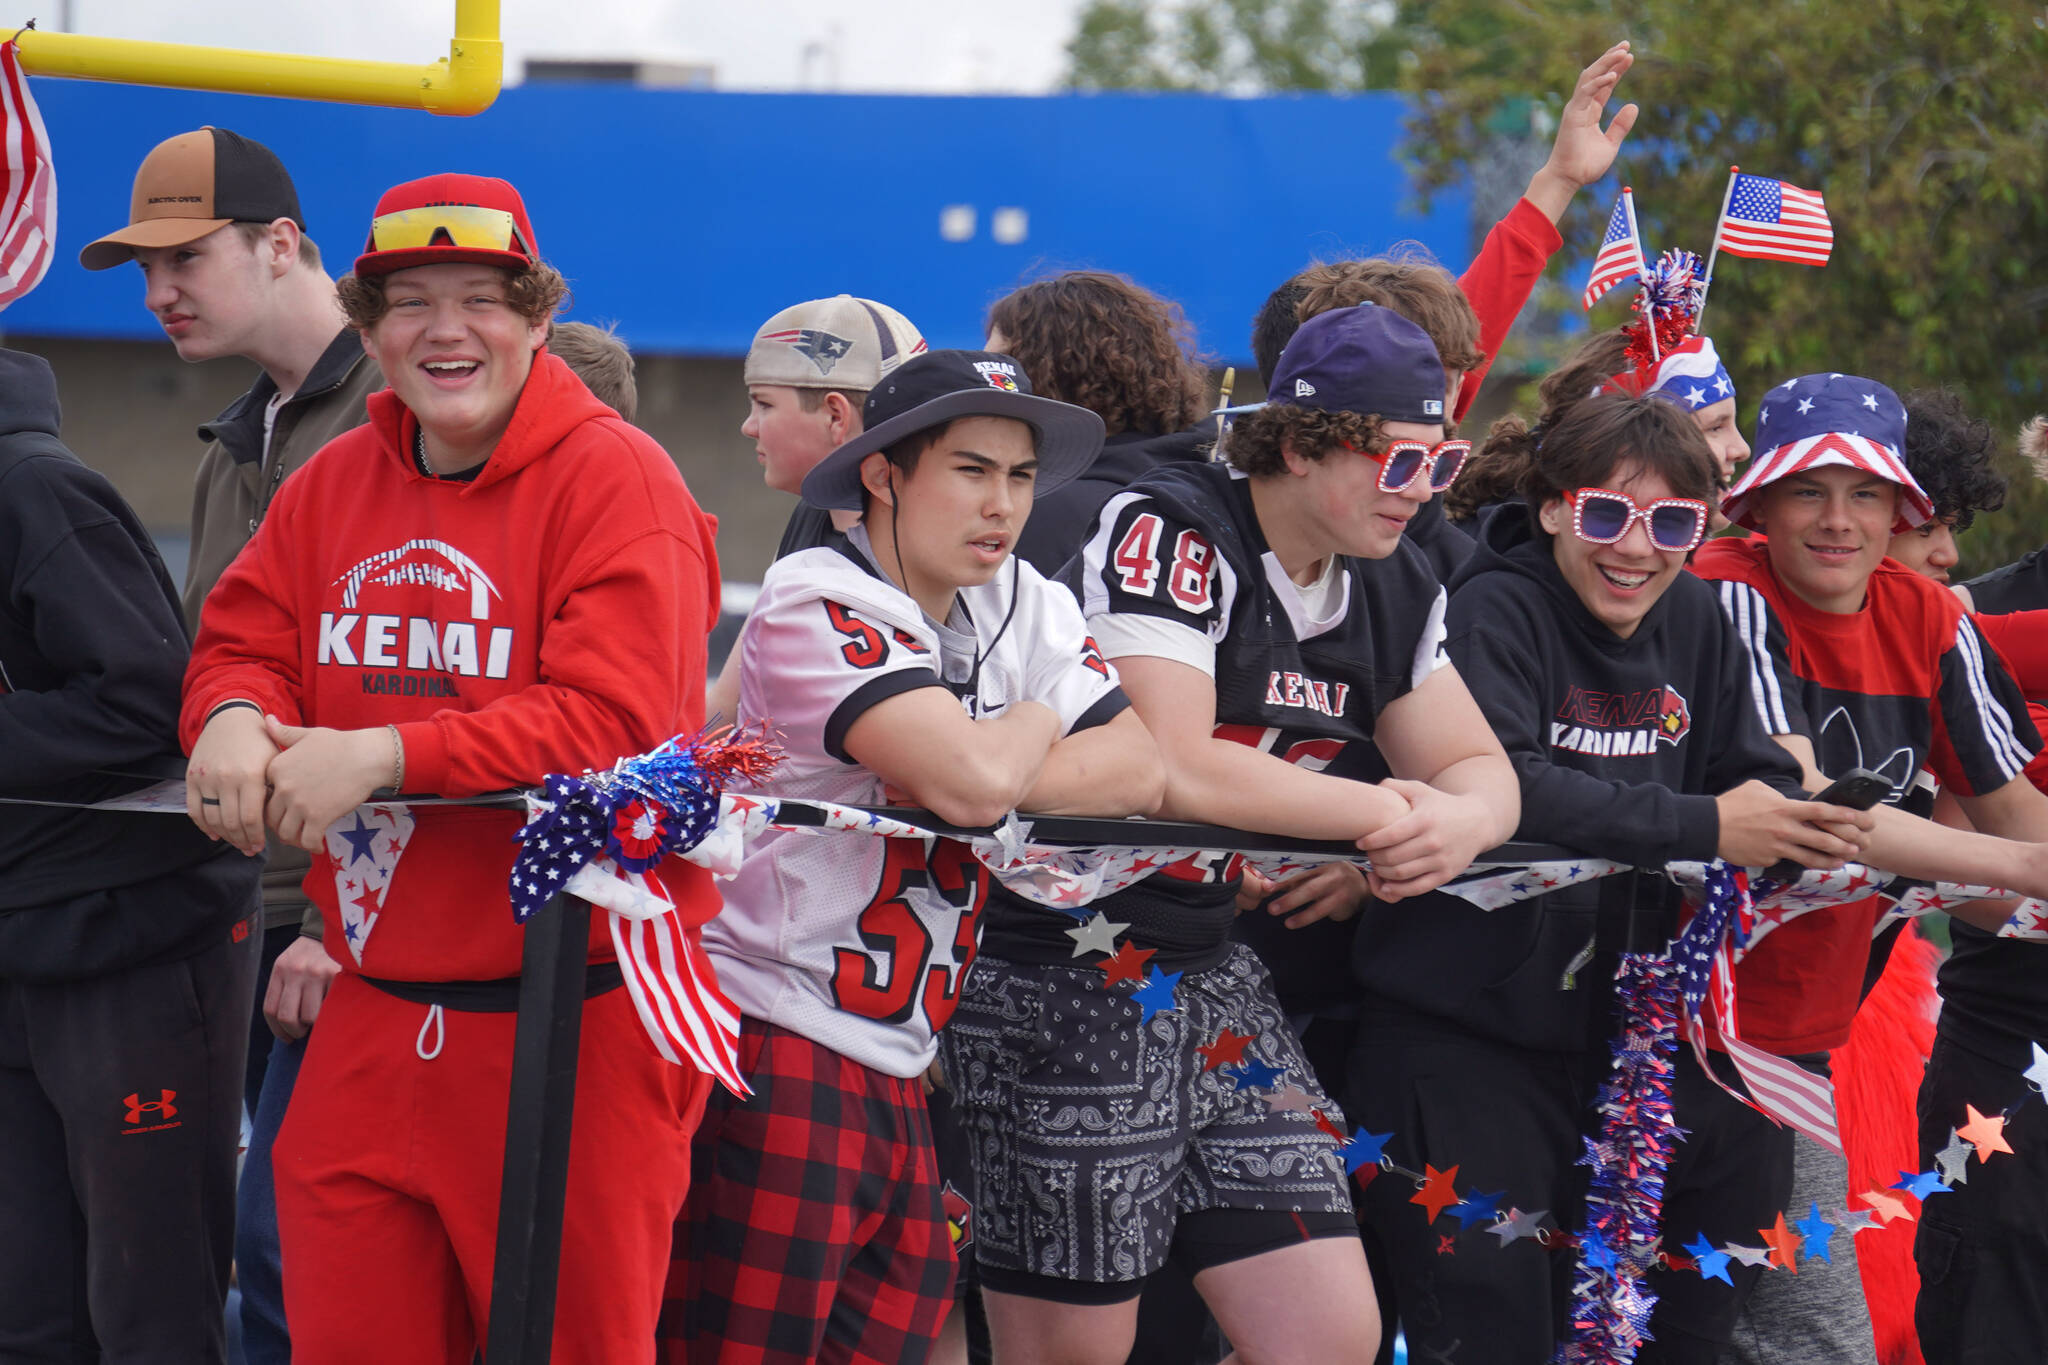 The Kenai Central High School football team smiles as the Fourth of July Parade moves down the Kenai Spur Highway in Kenai, Alaska on Tuesday, July 4, 2023. (Jake Dye/Peninsula Clarion)